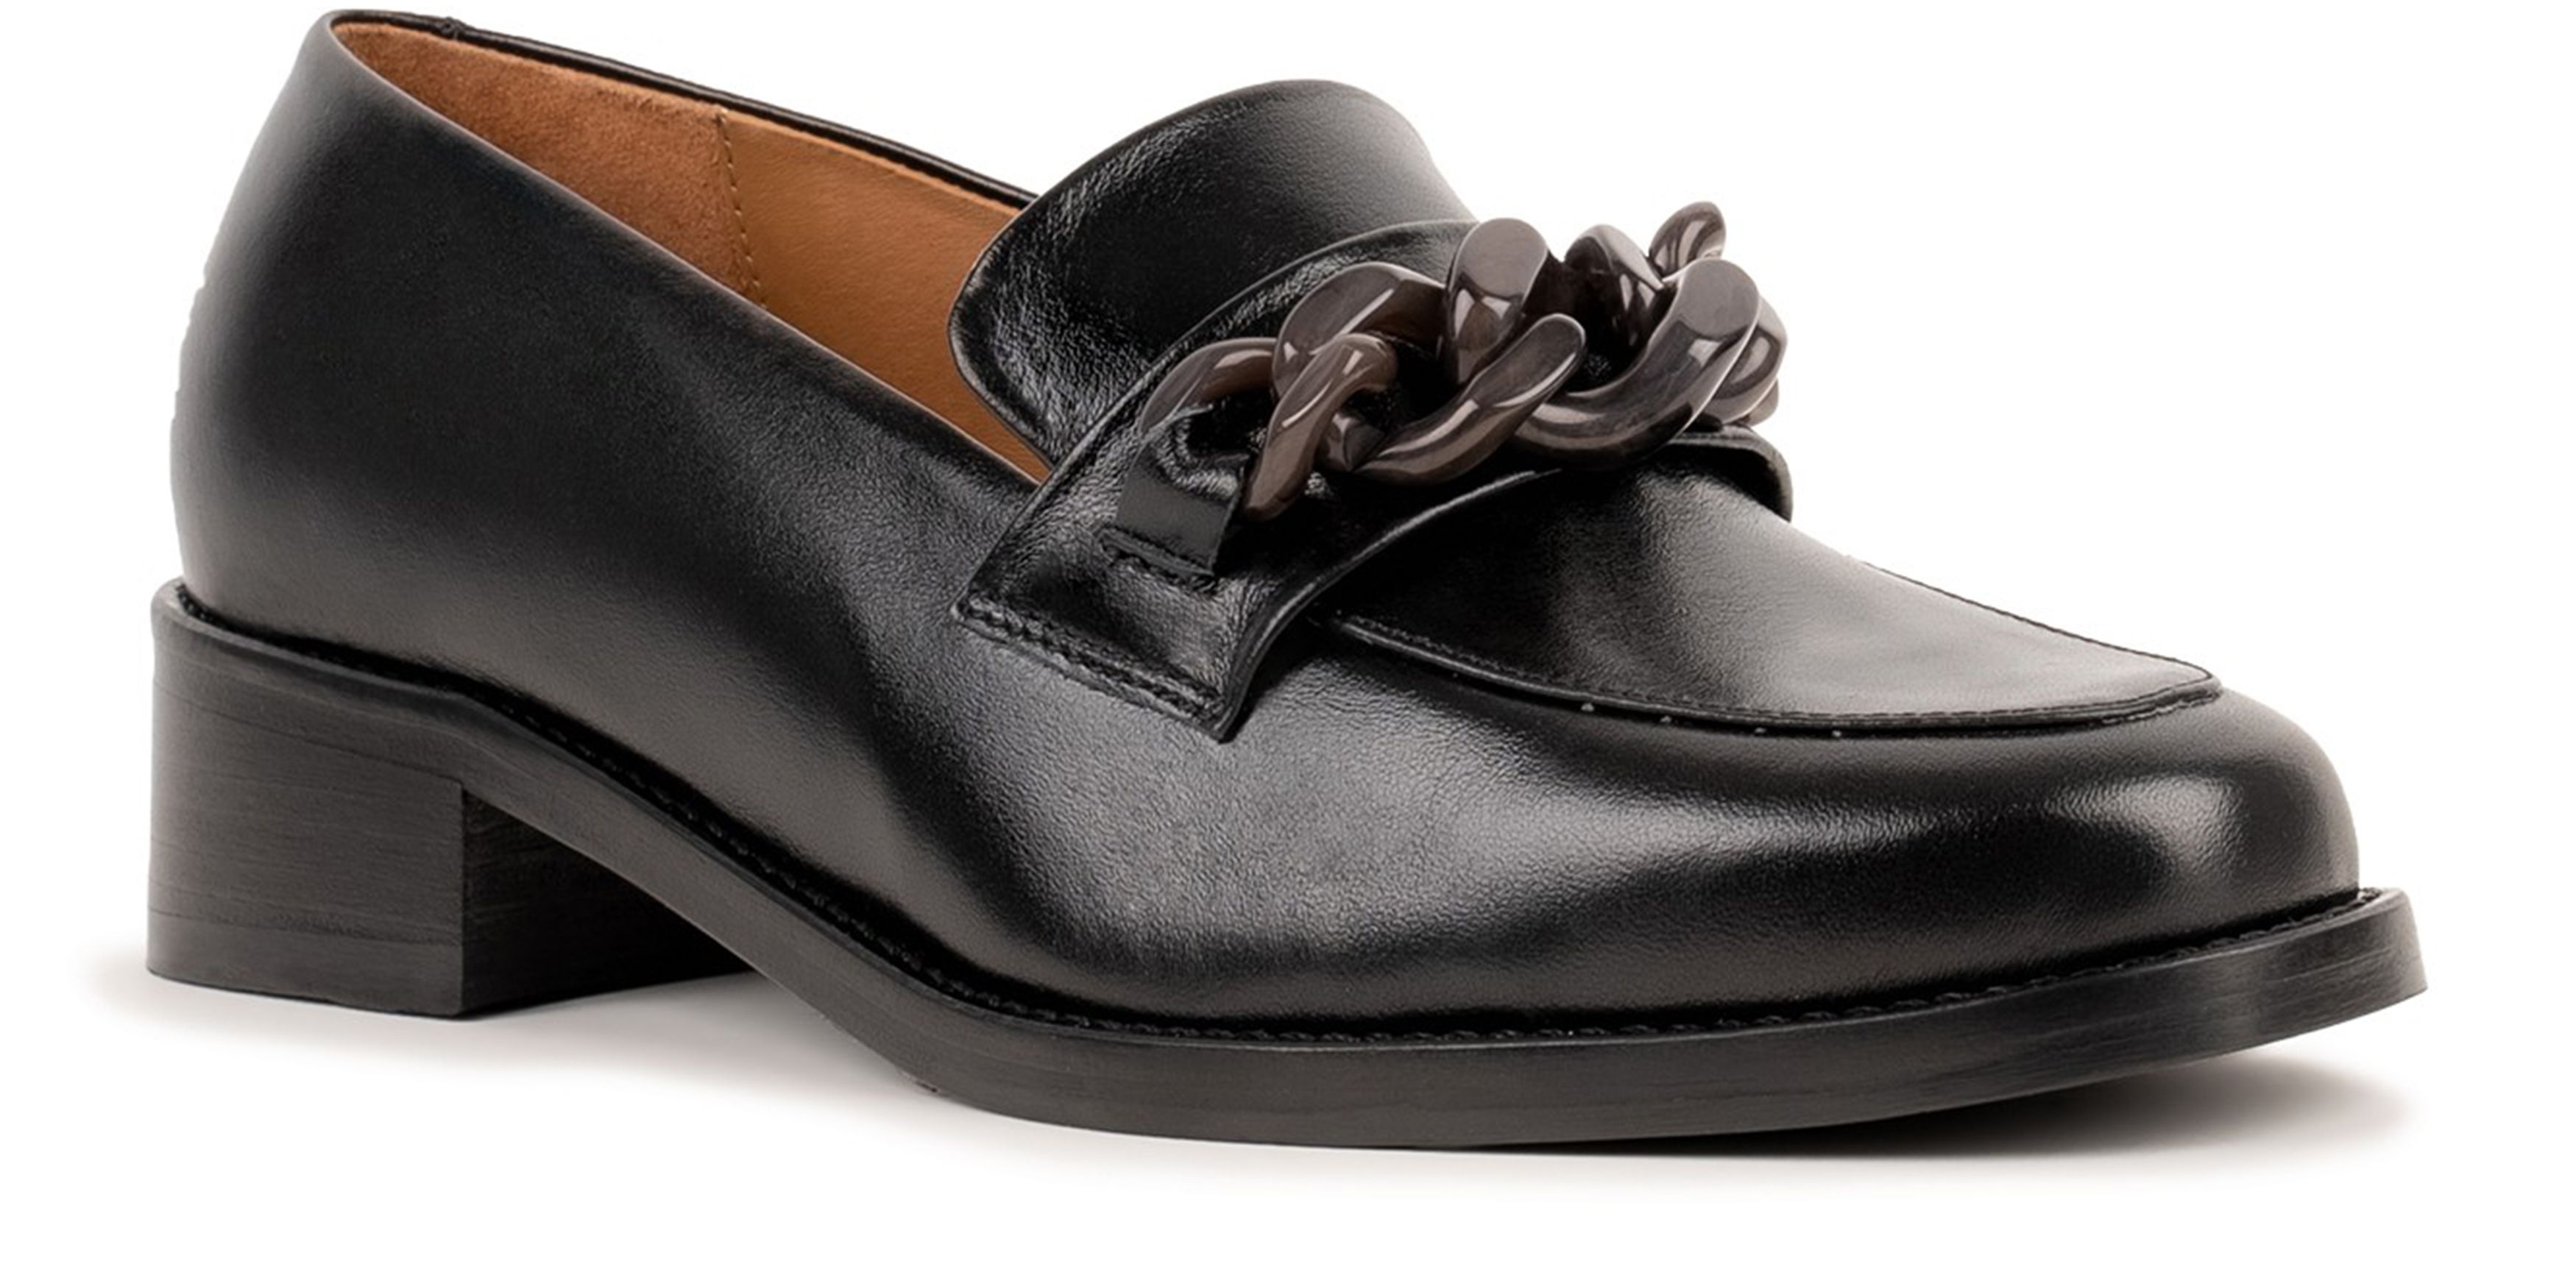  Esther loafers